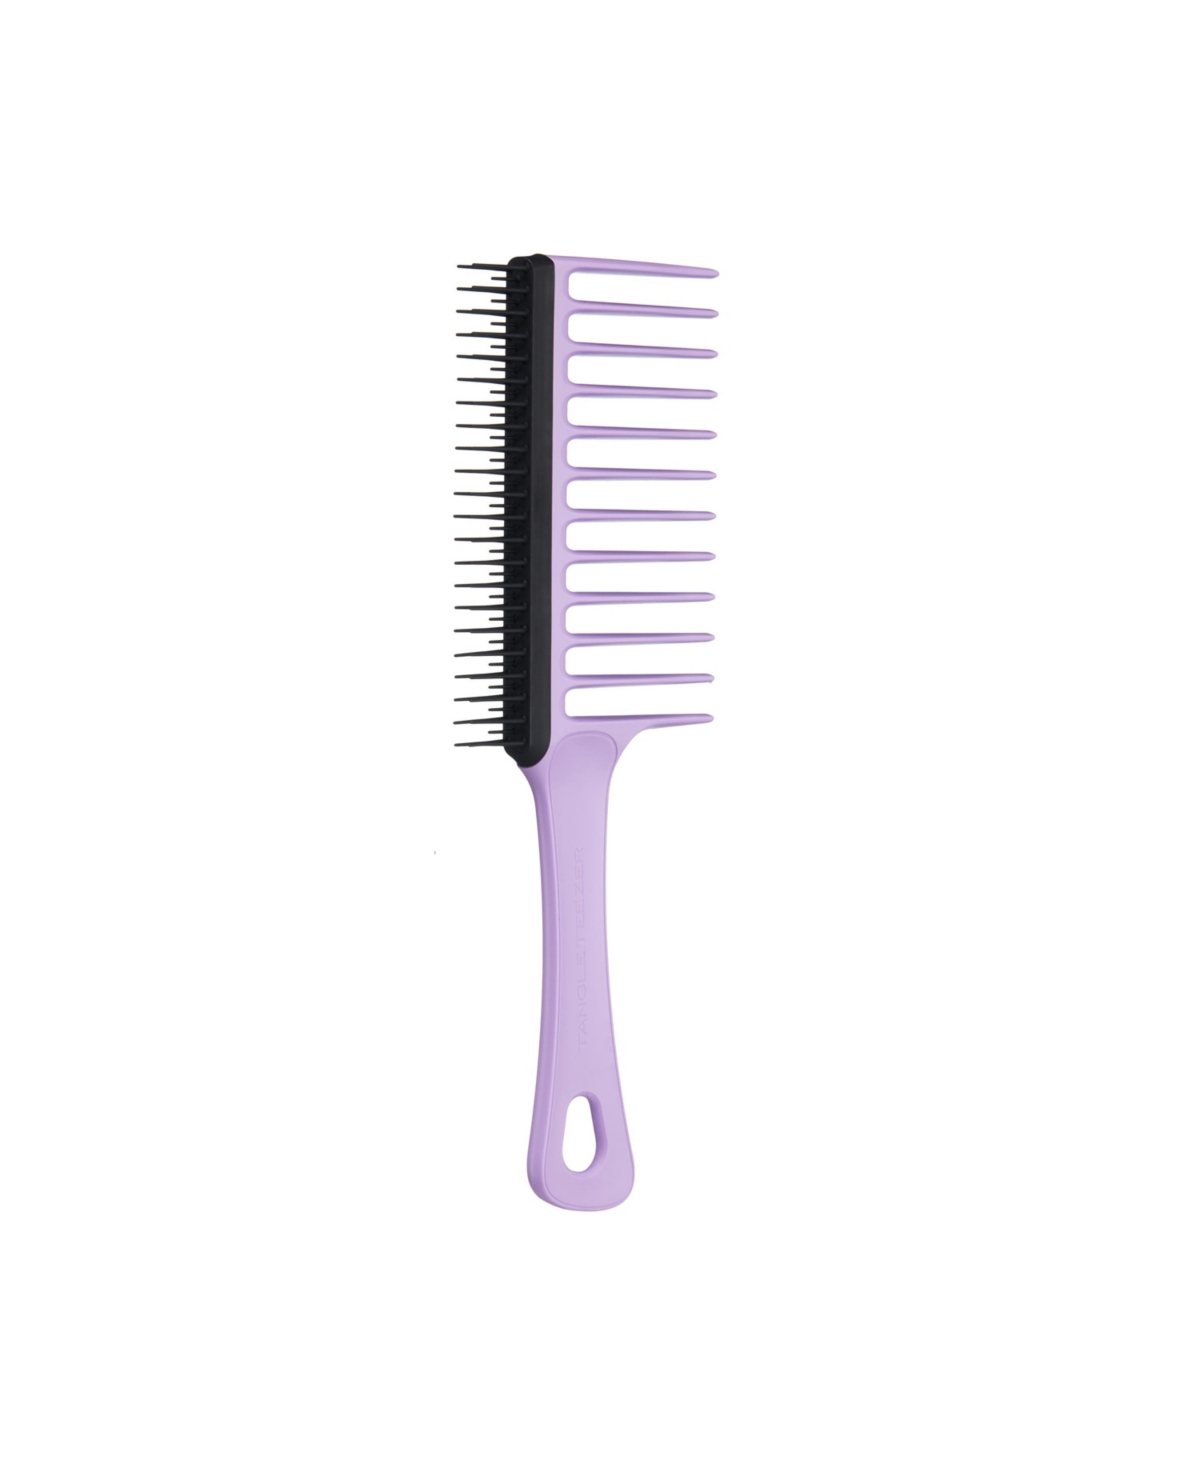 The Wide Tooth Comb - Lilac, Black